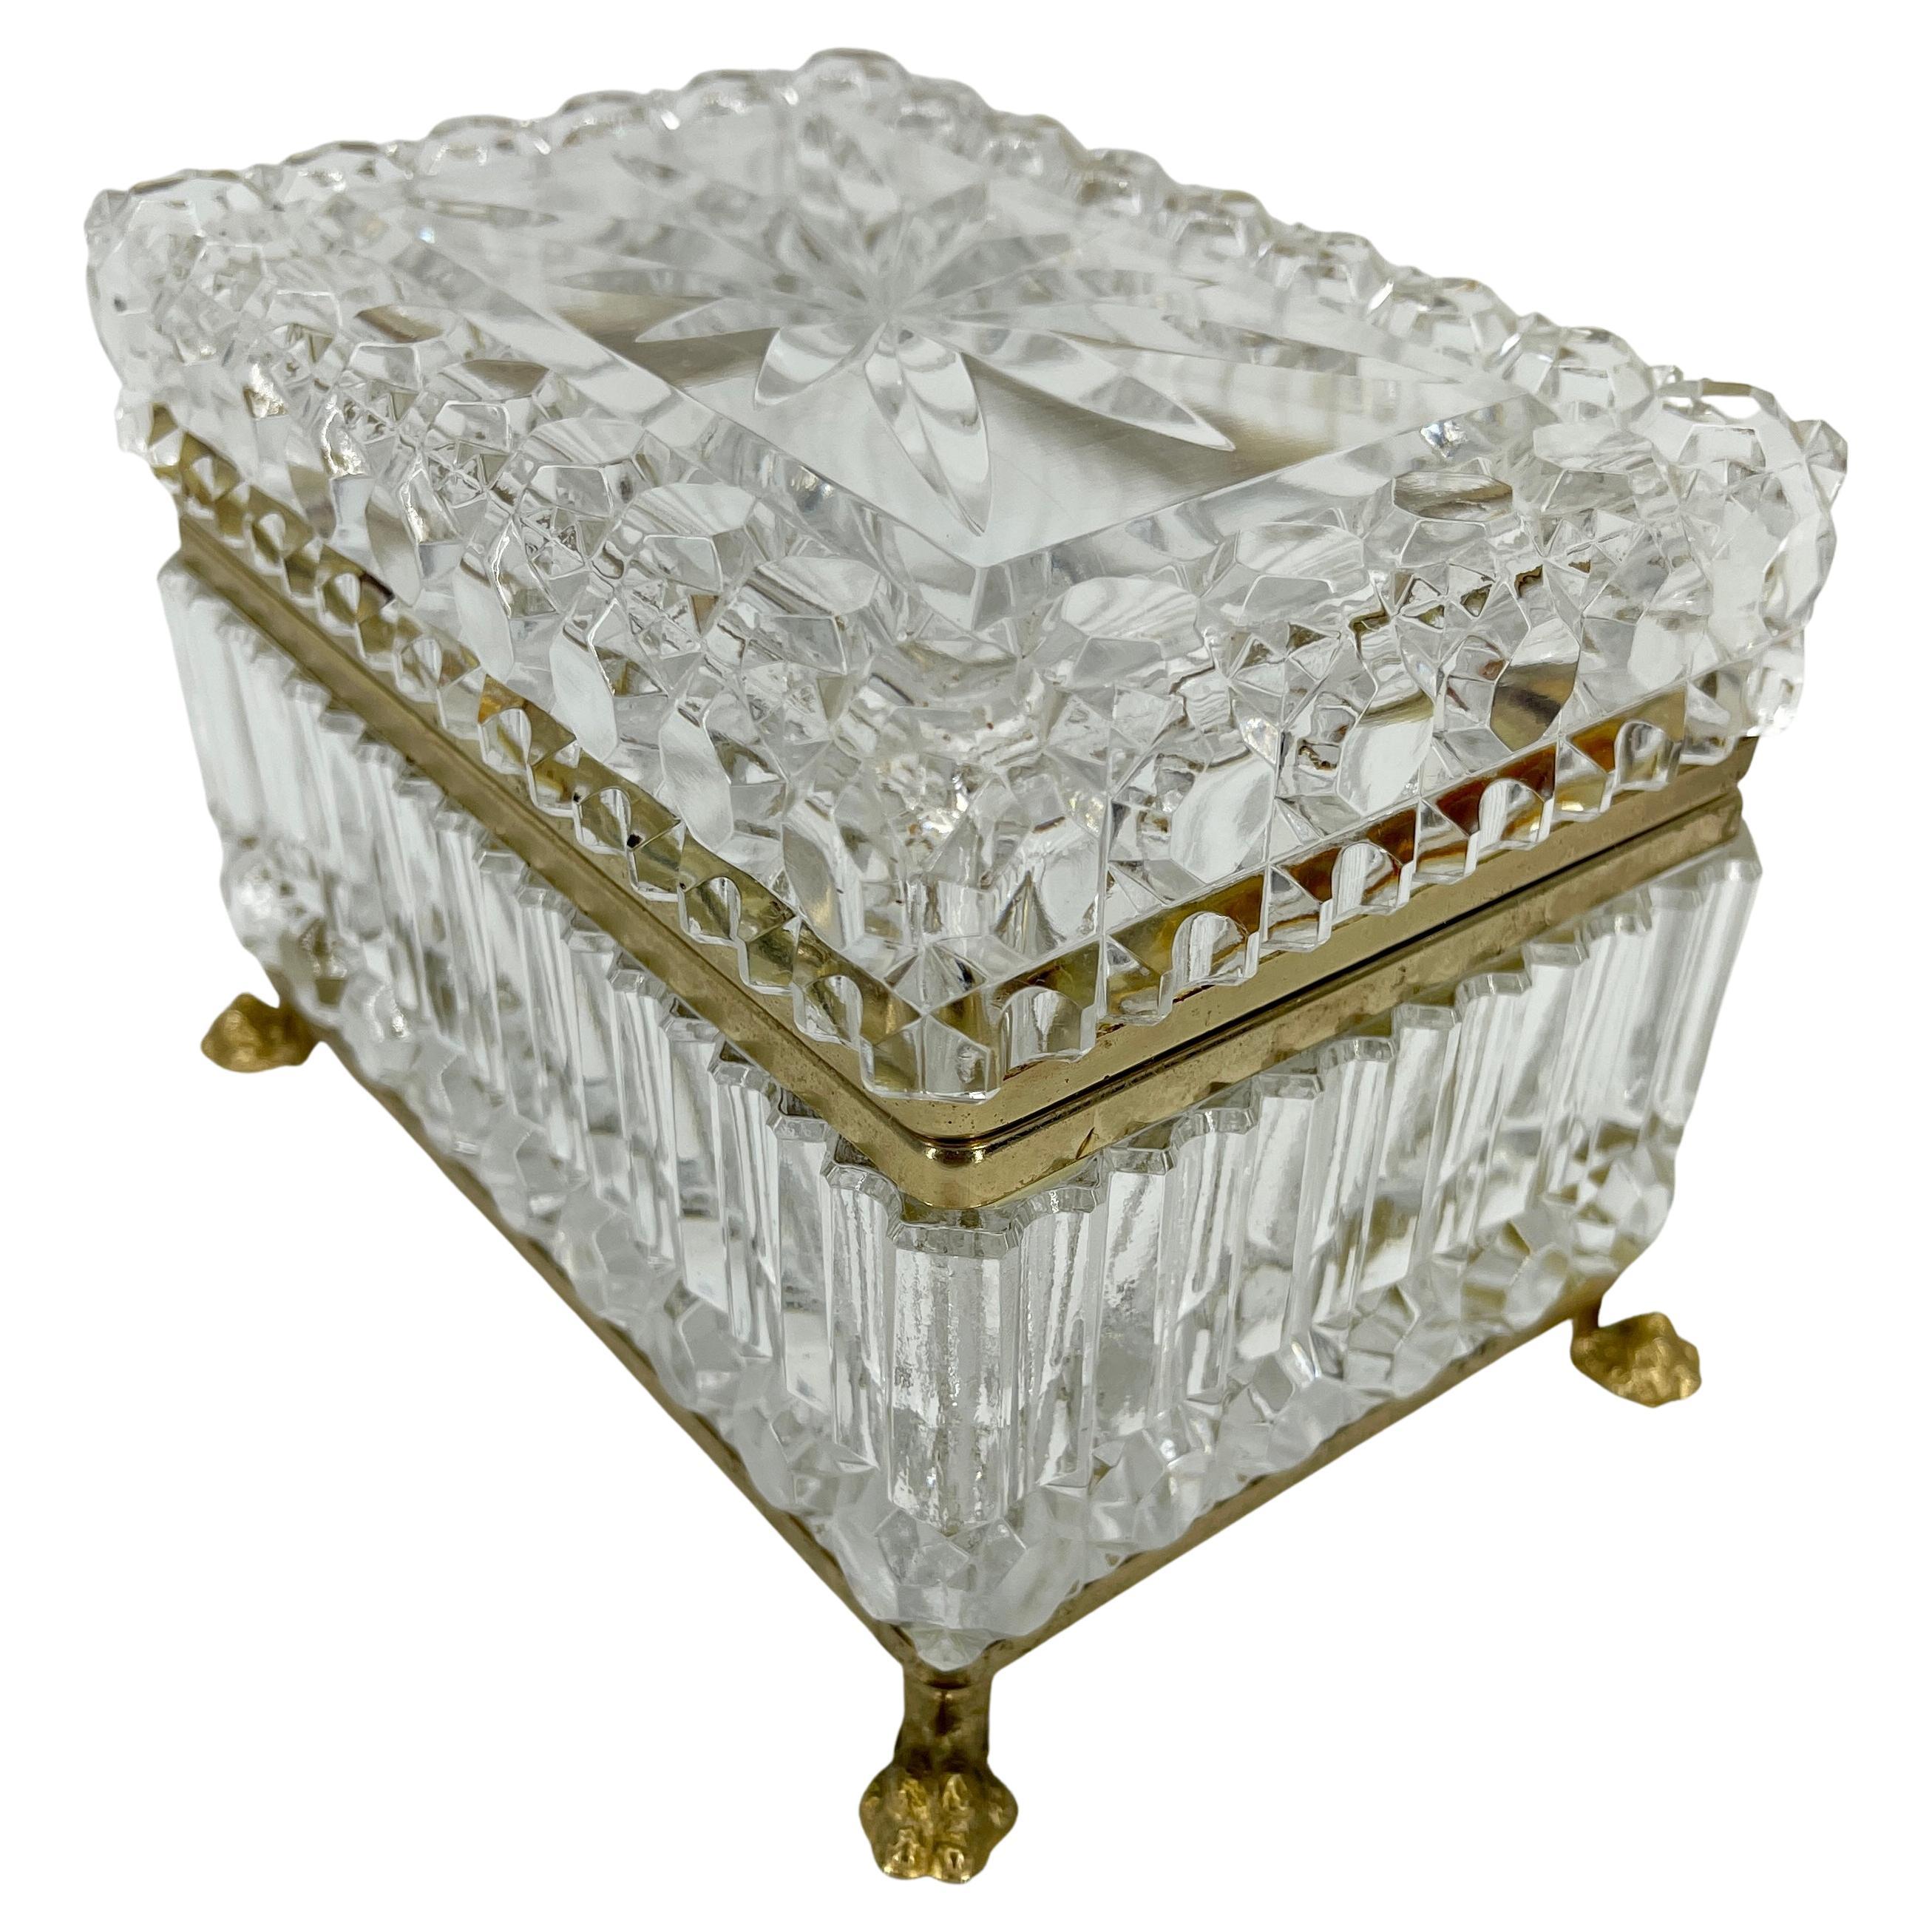 Antique pointed cut crystal and brass jewelry or vanity box. This small cut crystal box with gilded feet is perfect as a desk accessory, a candy dish, a vanity box or jewelry box. The lovely crystal box makes a statement in any decor and room. An